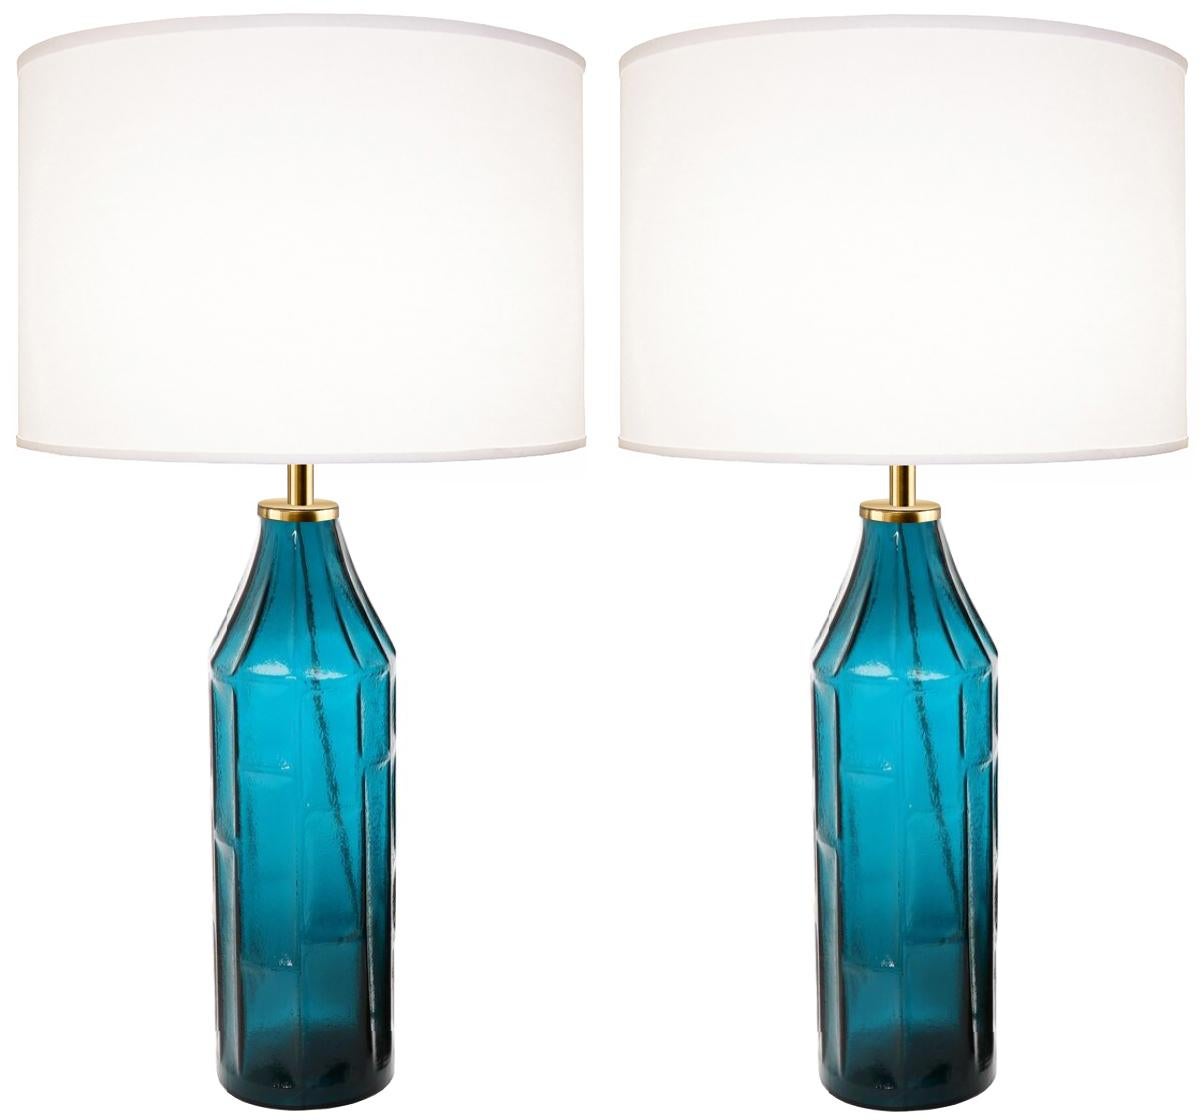 A pair of large oval teal blue glass lamps with brass hardware, Swedish, 1960s.